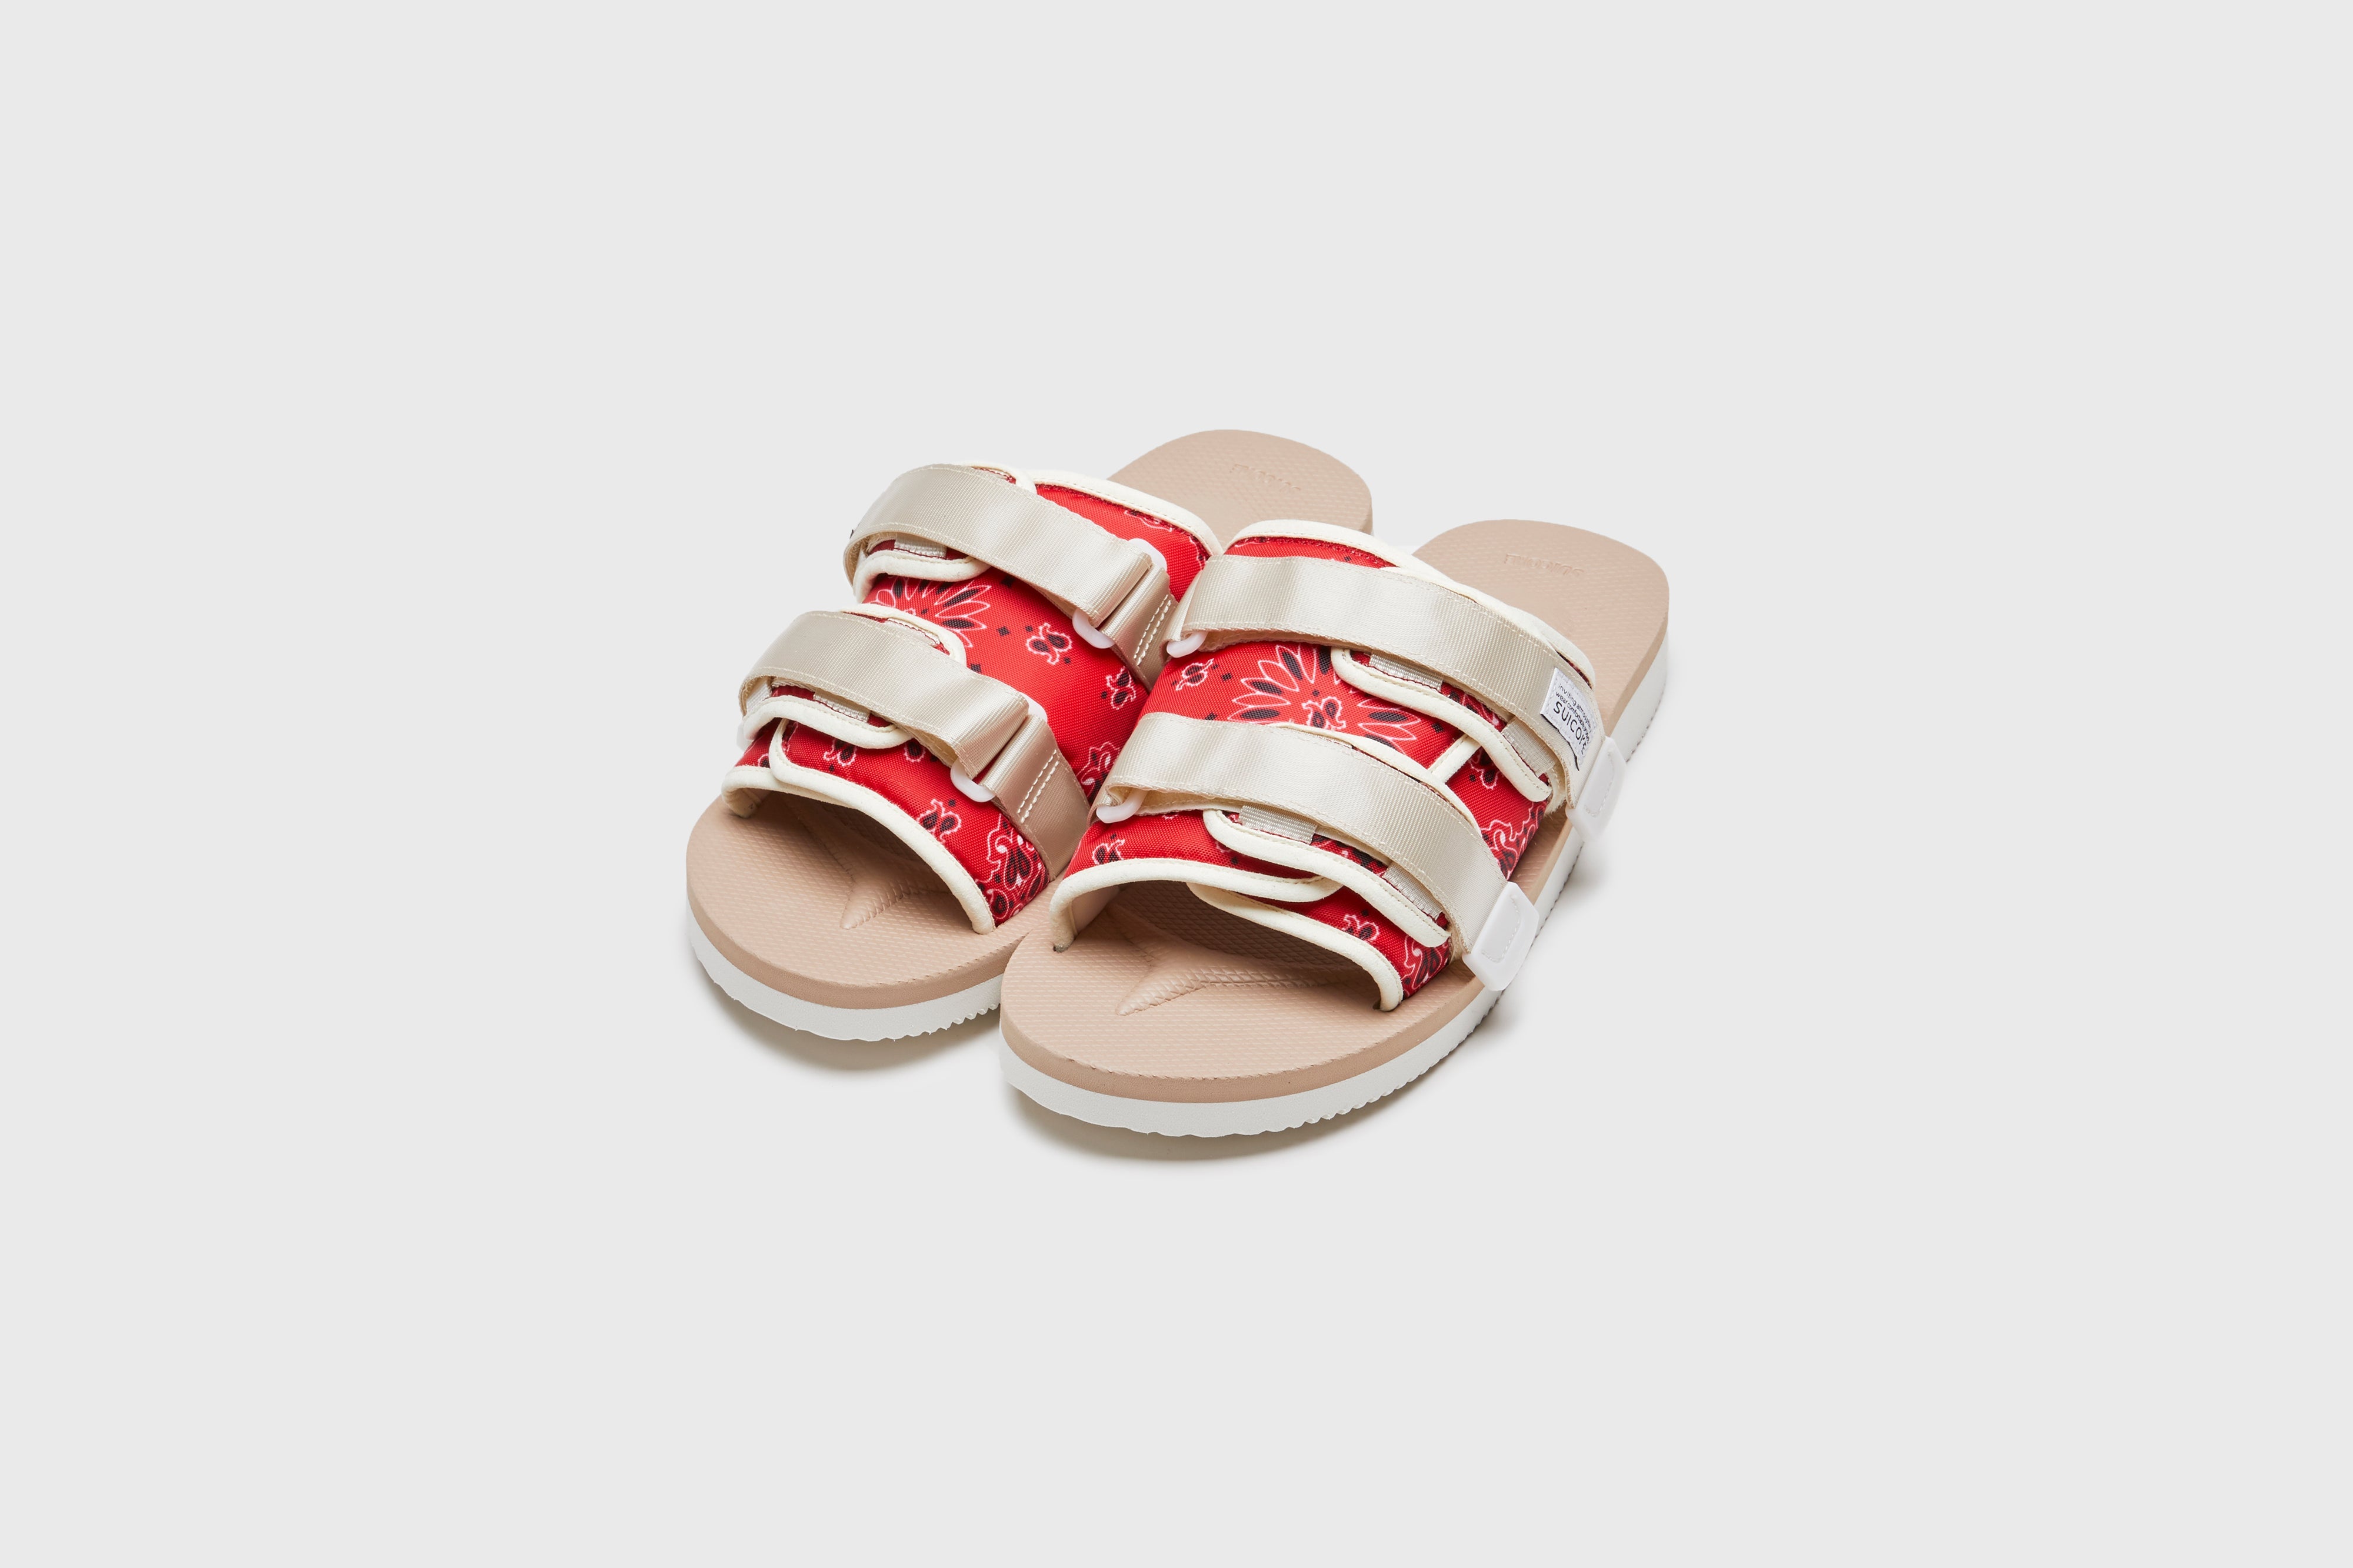 SUICOKE MOTO-Cab-PT05 slides with red & beige nylon upper, red & beige midsole and sole, strap and logo patch. From Spring/Summer 2023 collection on eightywingold Web Store, an official partner of SUICOKE. OG-056CAB-PT05 RED X BEIGE